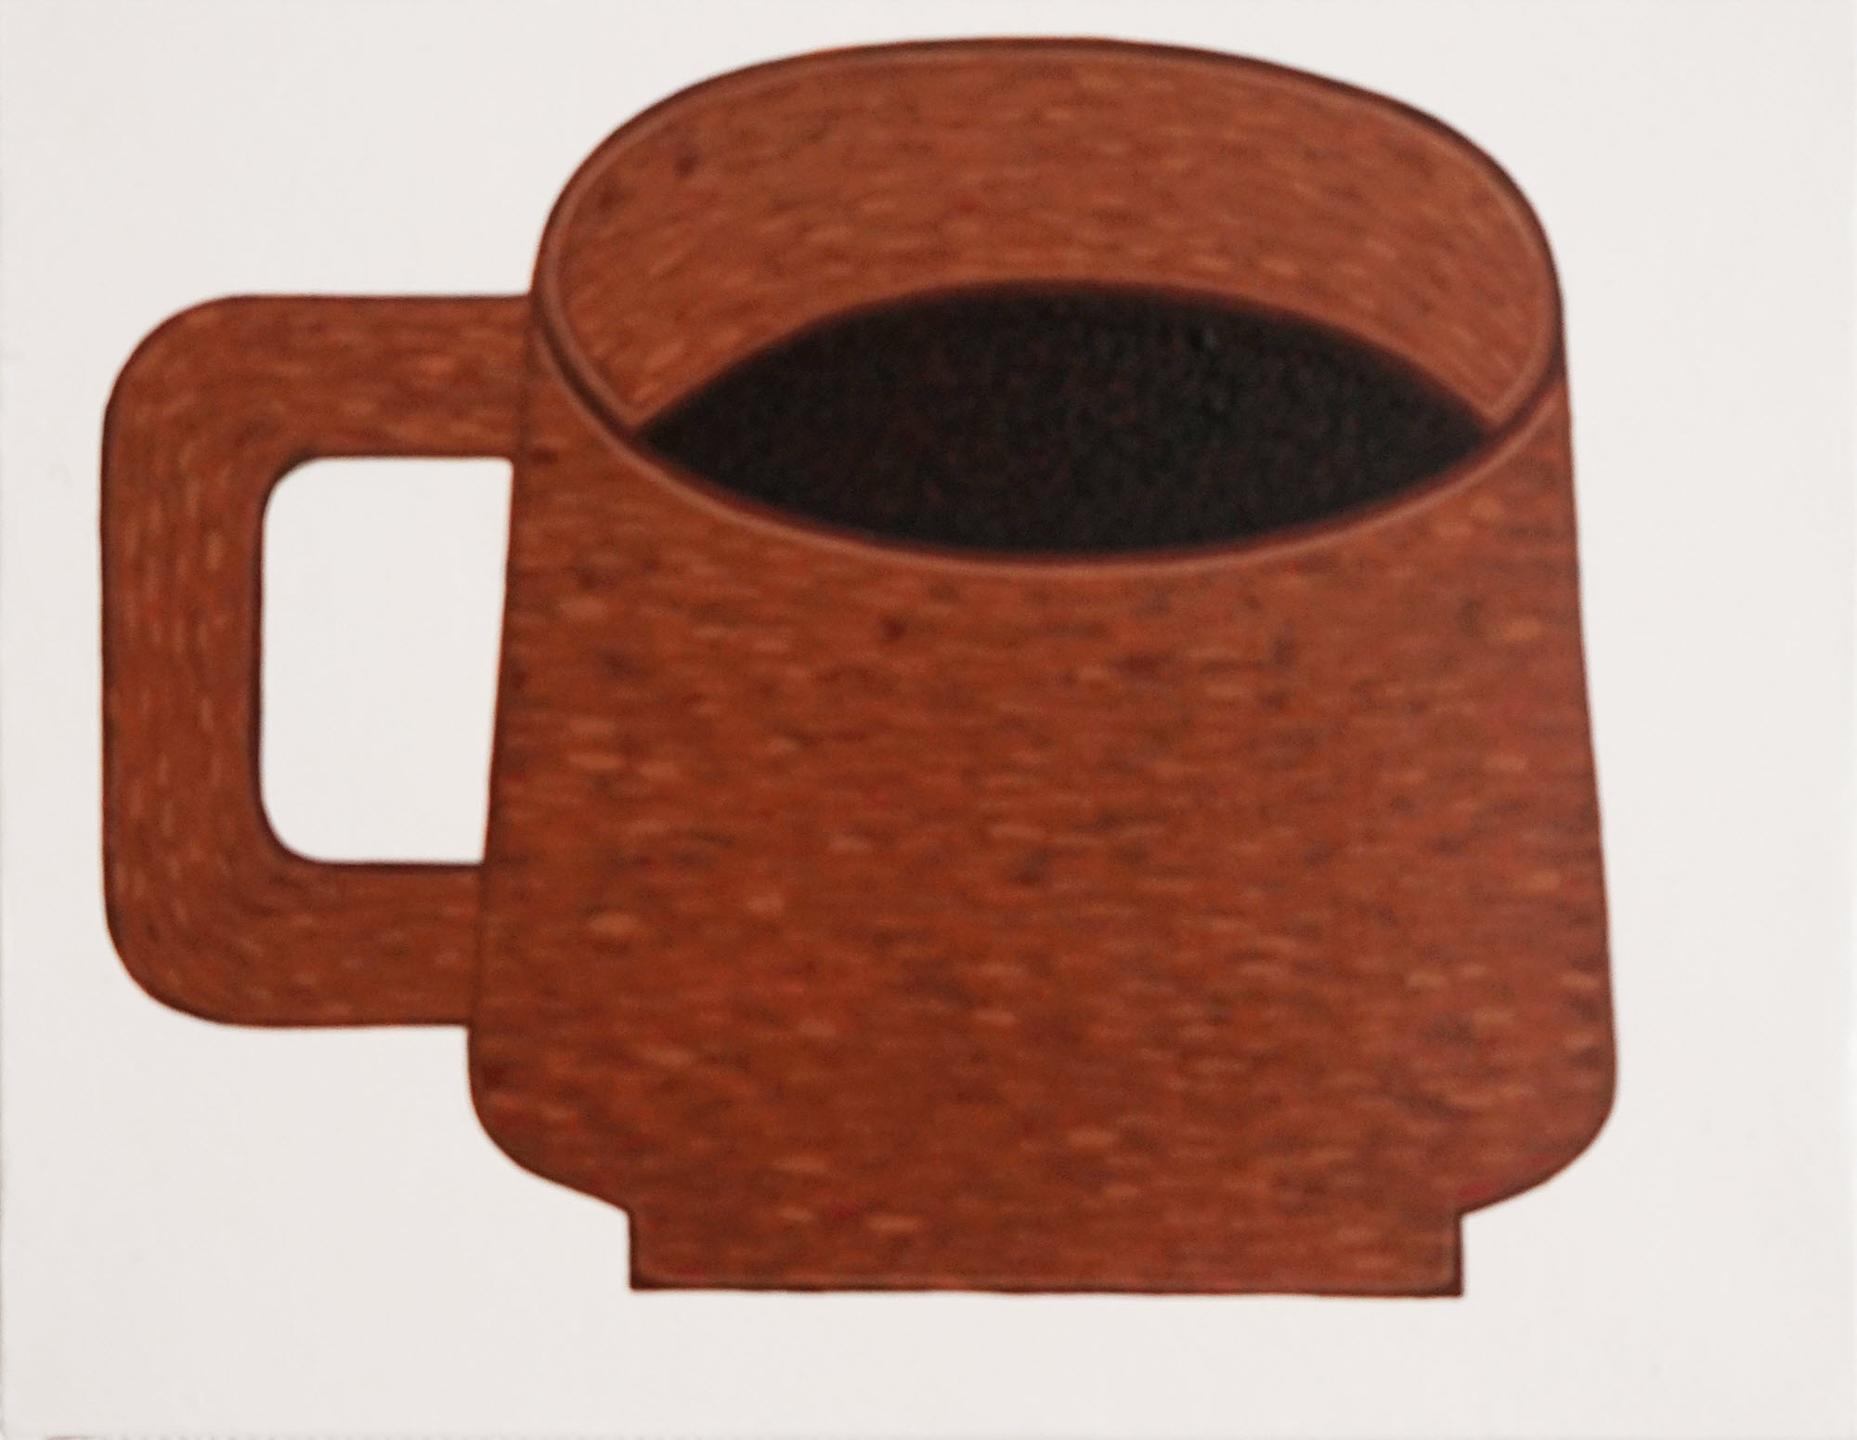 His table＿brown cup